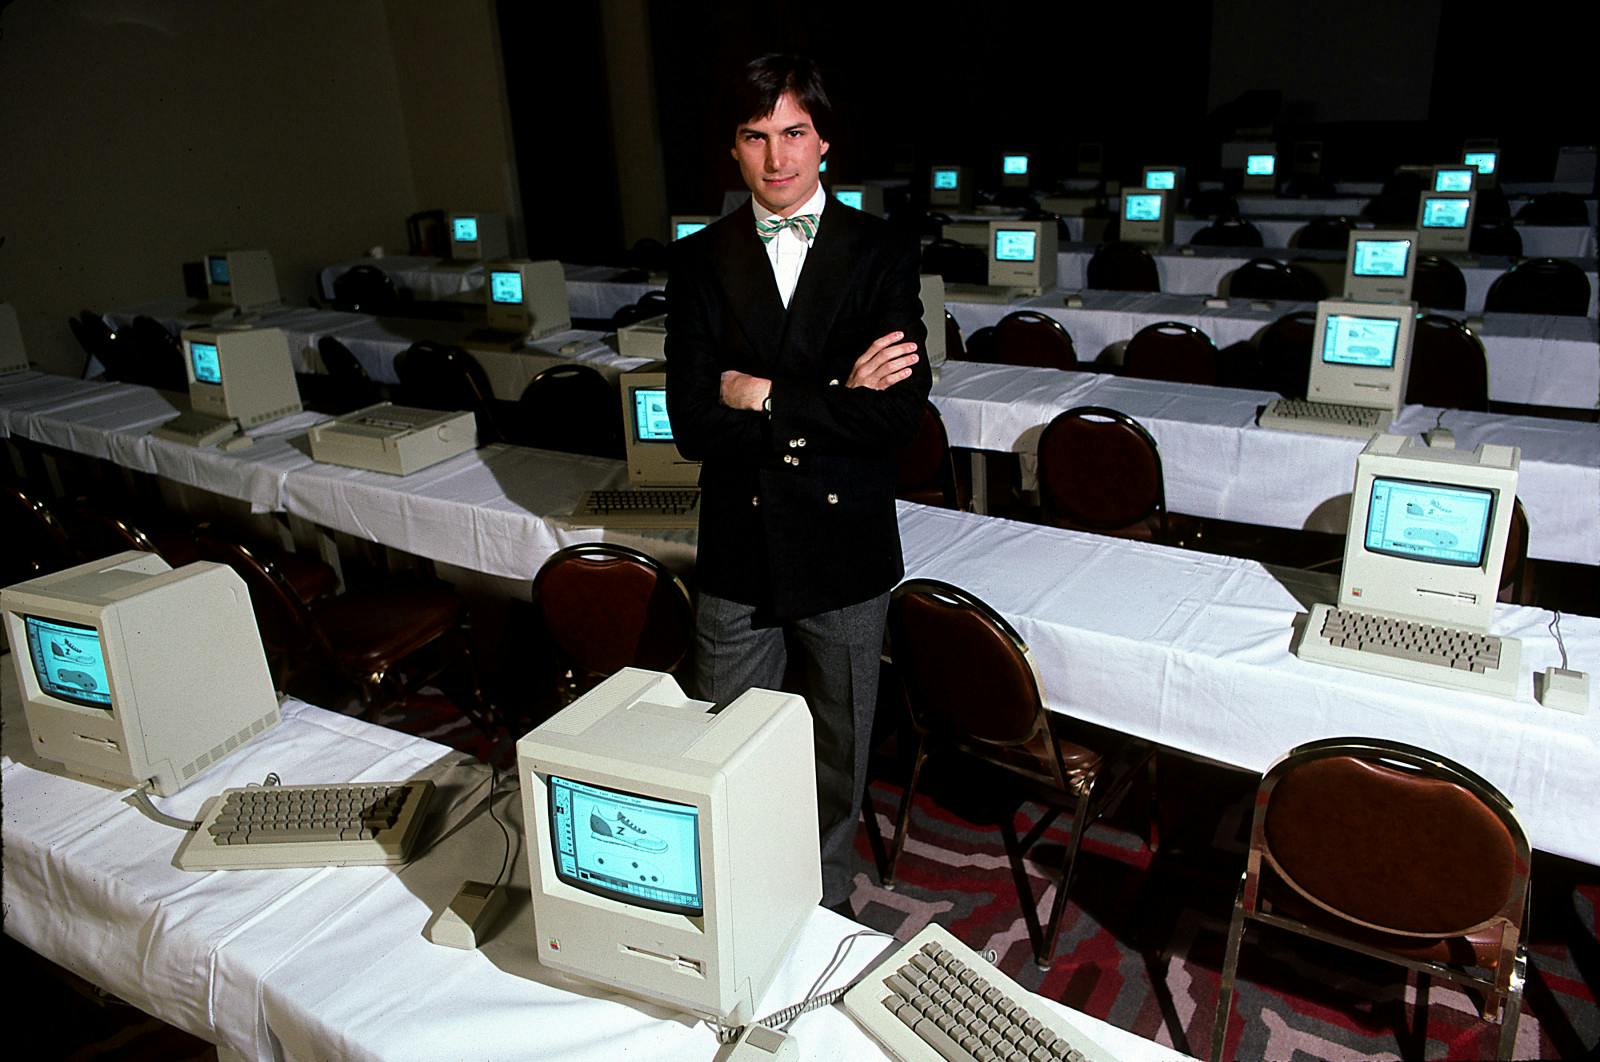 Steve Jobs with room full of computers, 1984 (Michael L Abramson/Getty Images)
